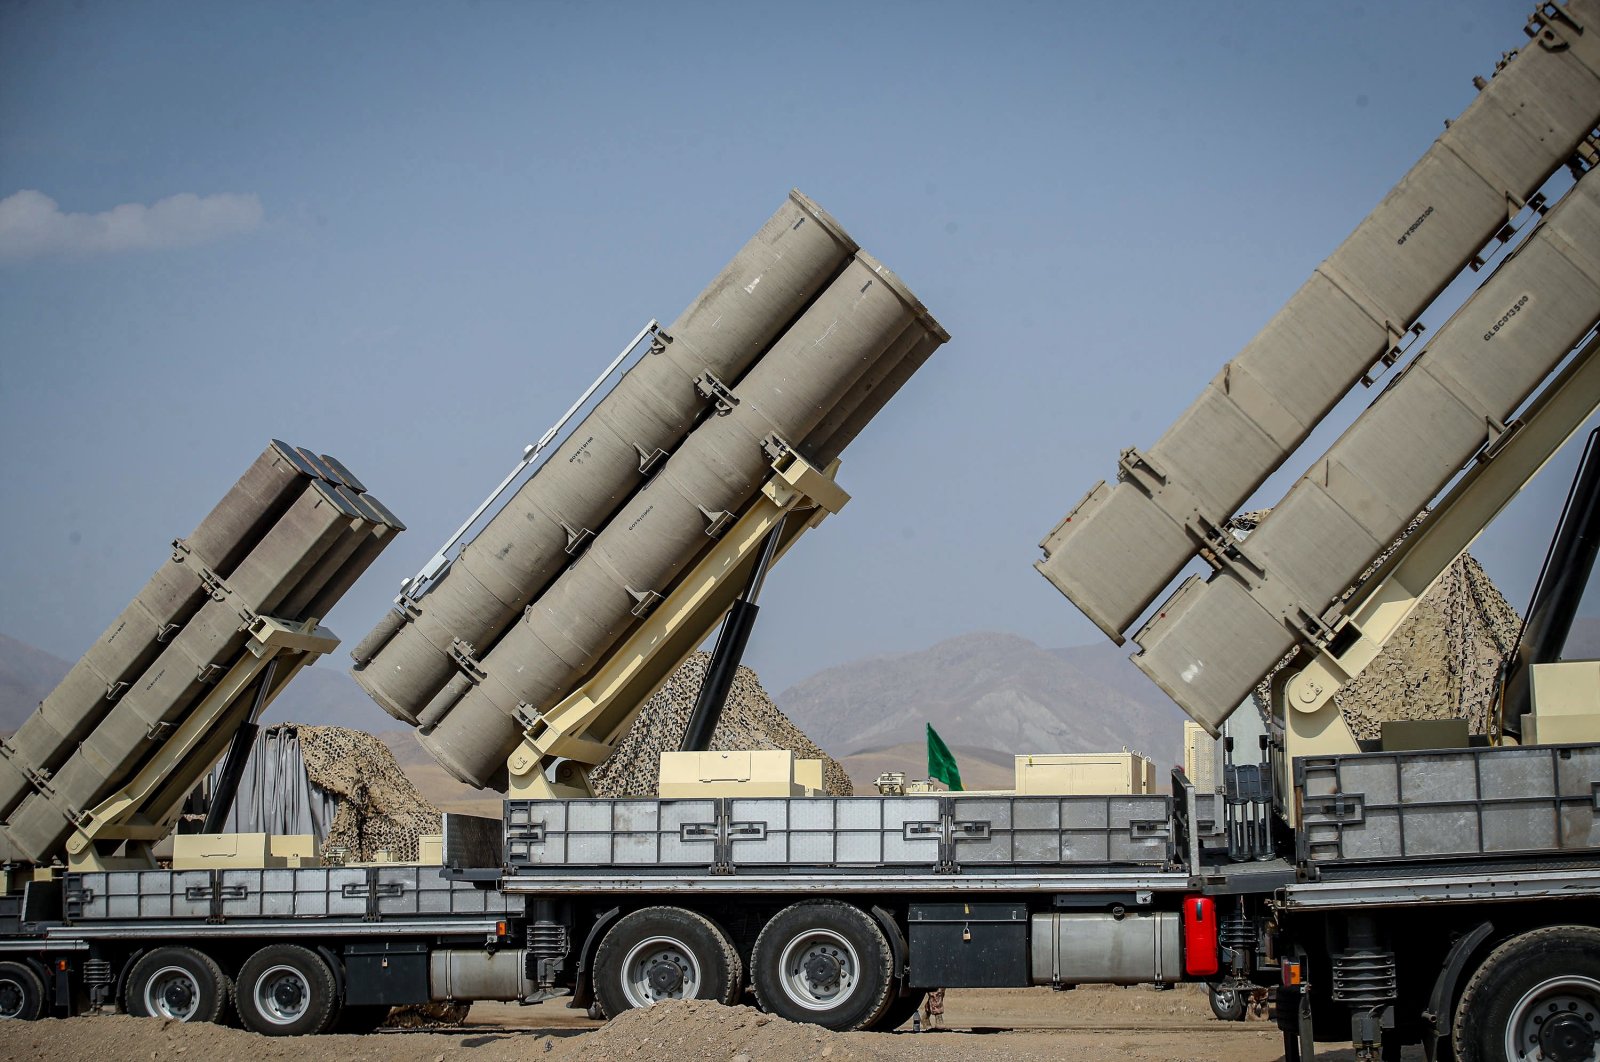 Iranian missile systems are seen during an Iranian Revolutionary Guards Corps military drill in Aras, Iran, Oct. 17, 2022. (IRGC office via EPA)